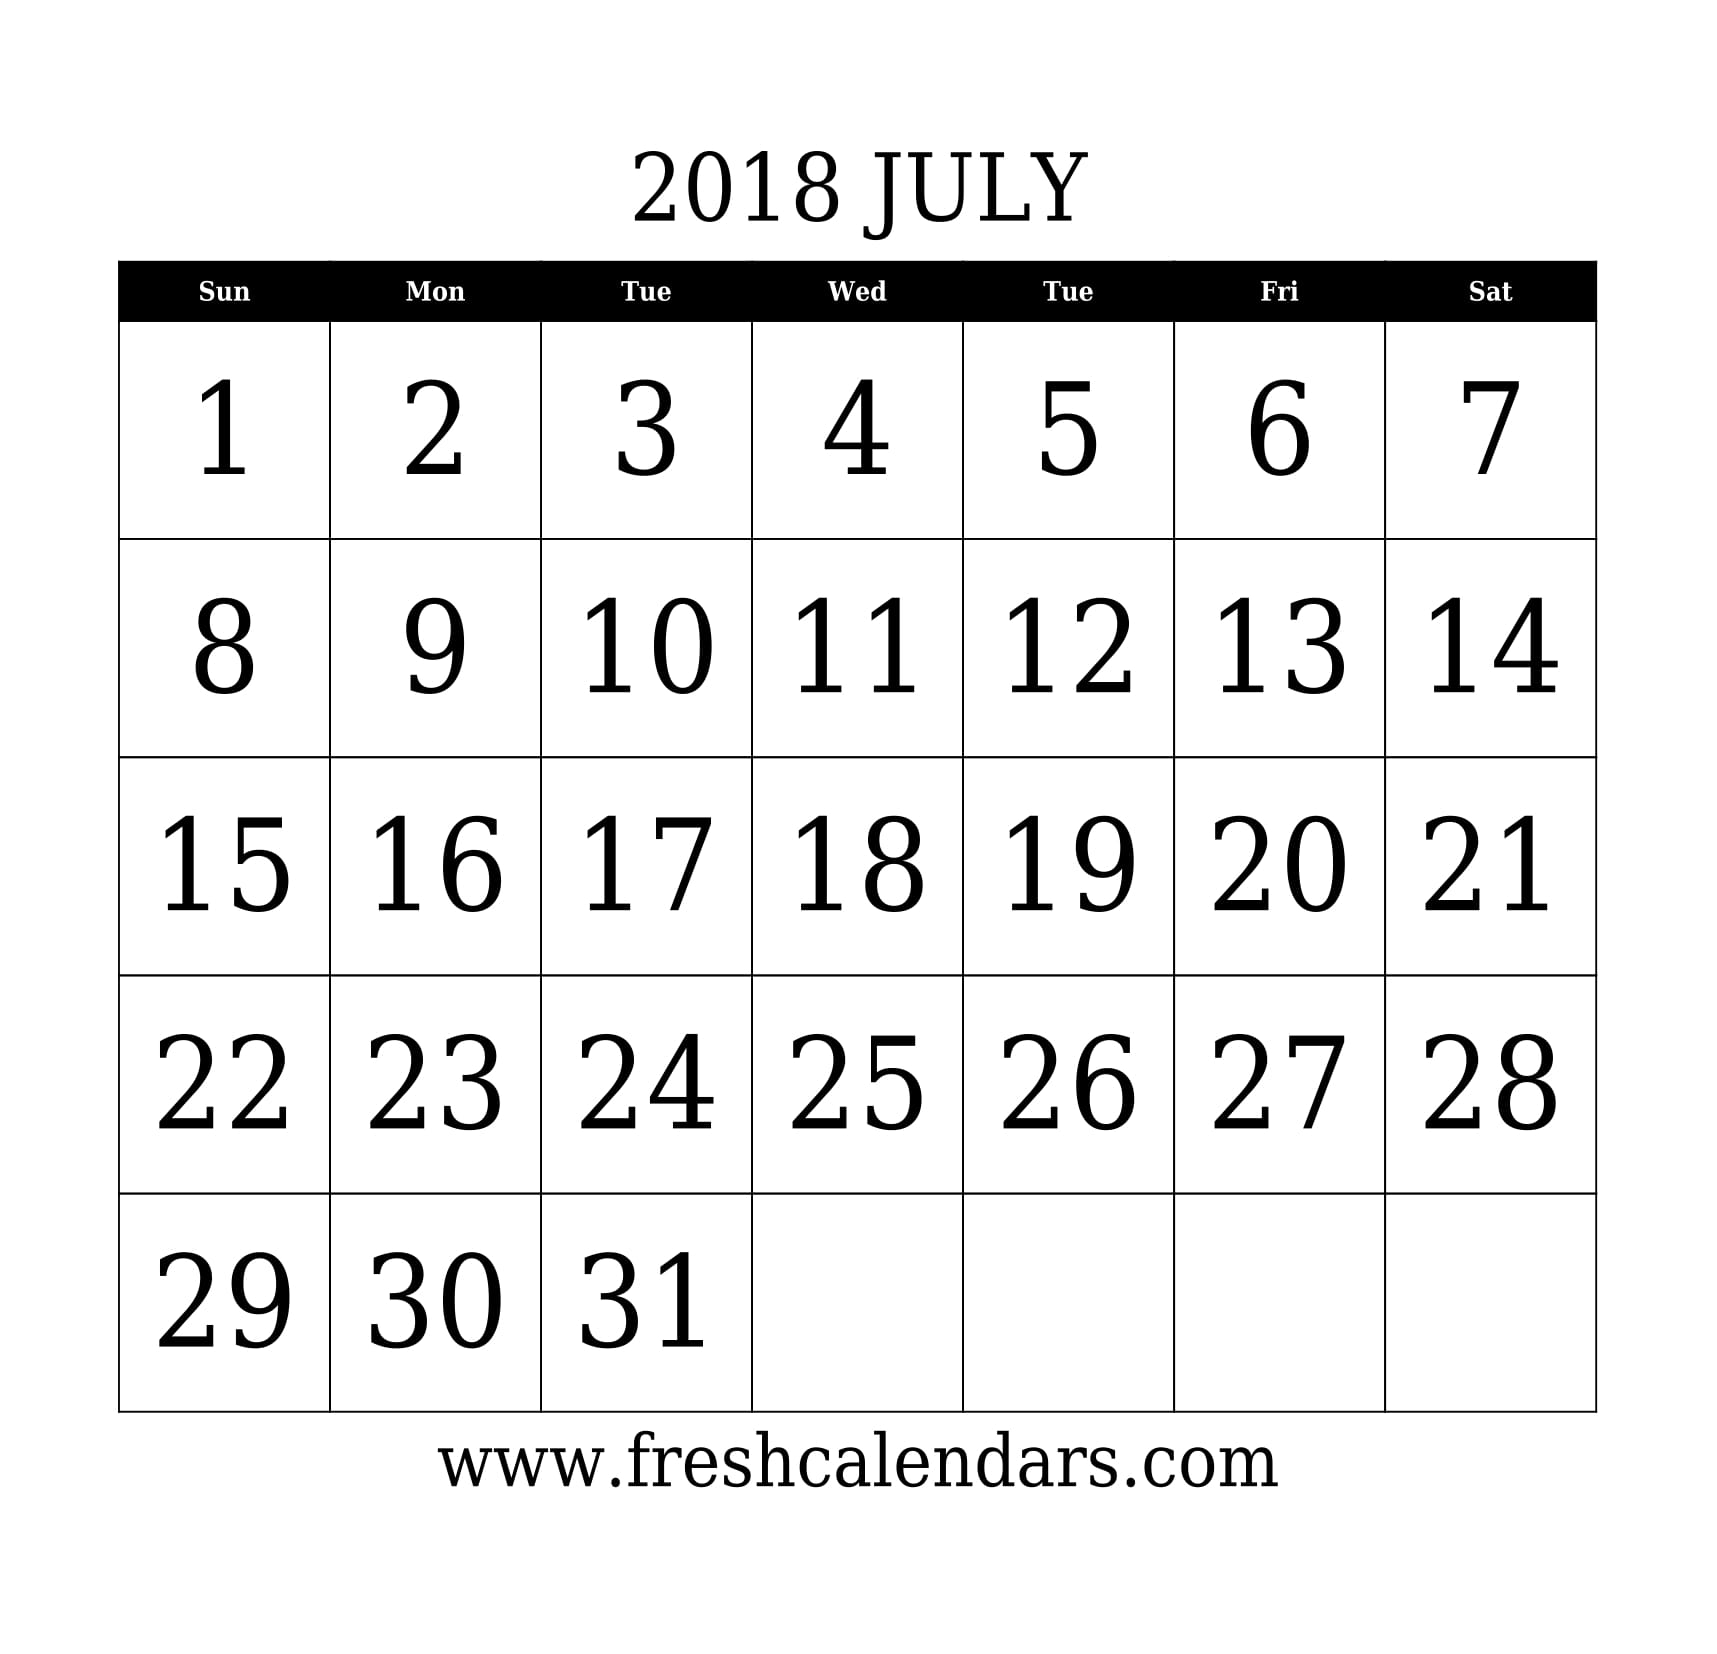 July 2018 Calendar With Large Dates